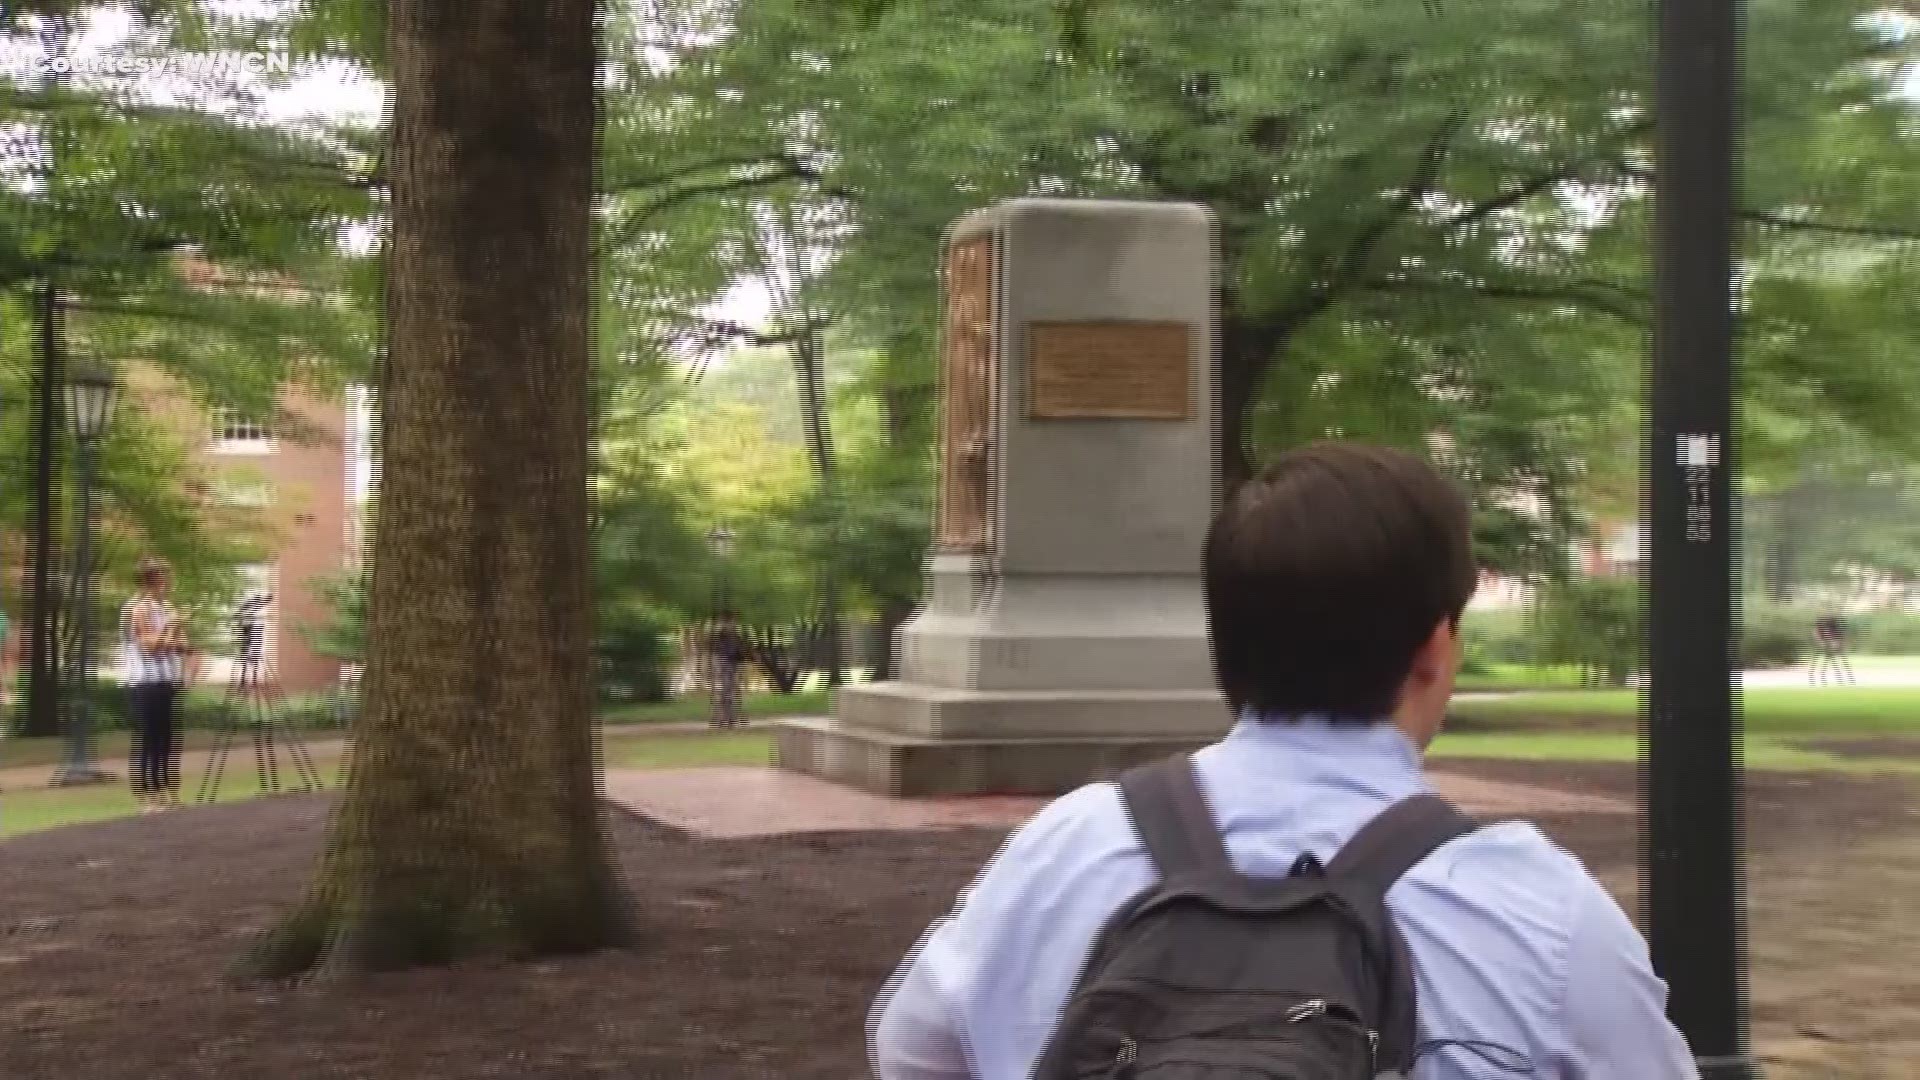 Students react after the toppling of Silent Sam.